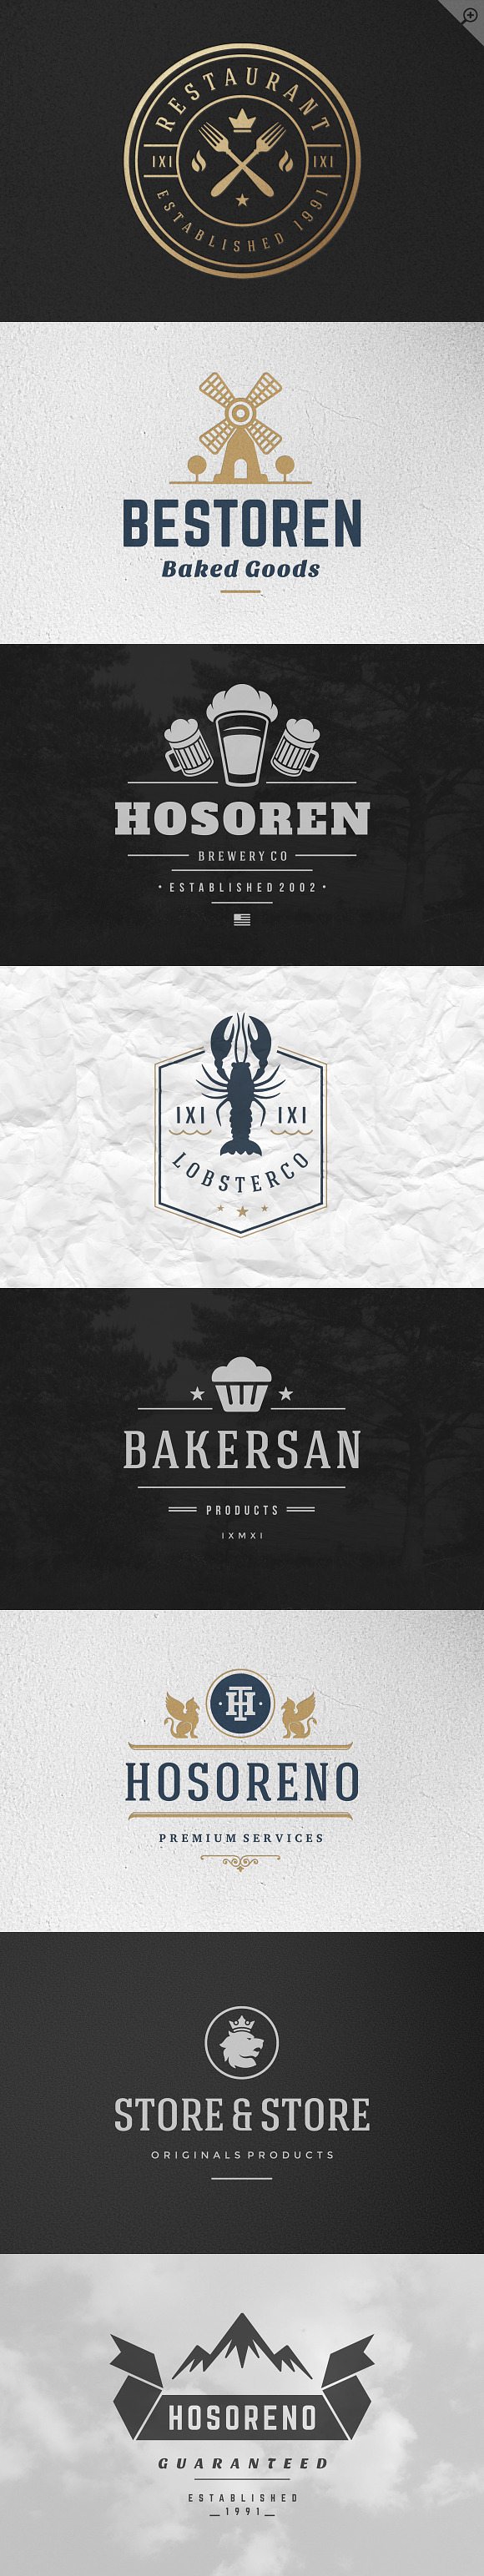 16 Vintage Logotypes or Badges in Logo Templates - product preview 2